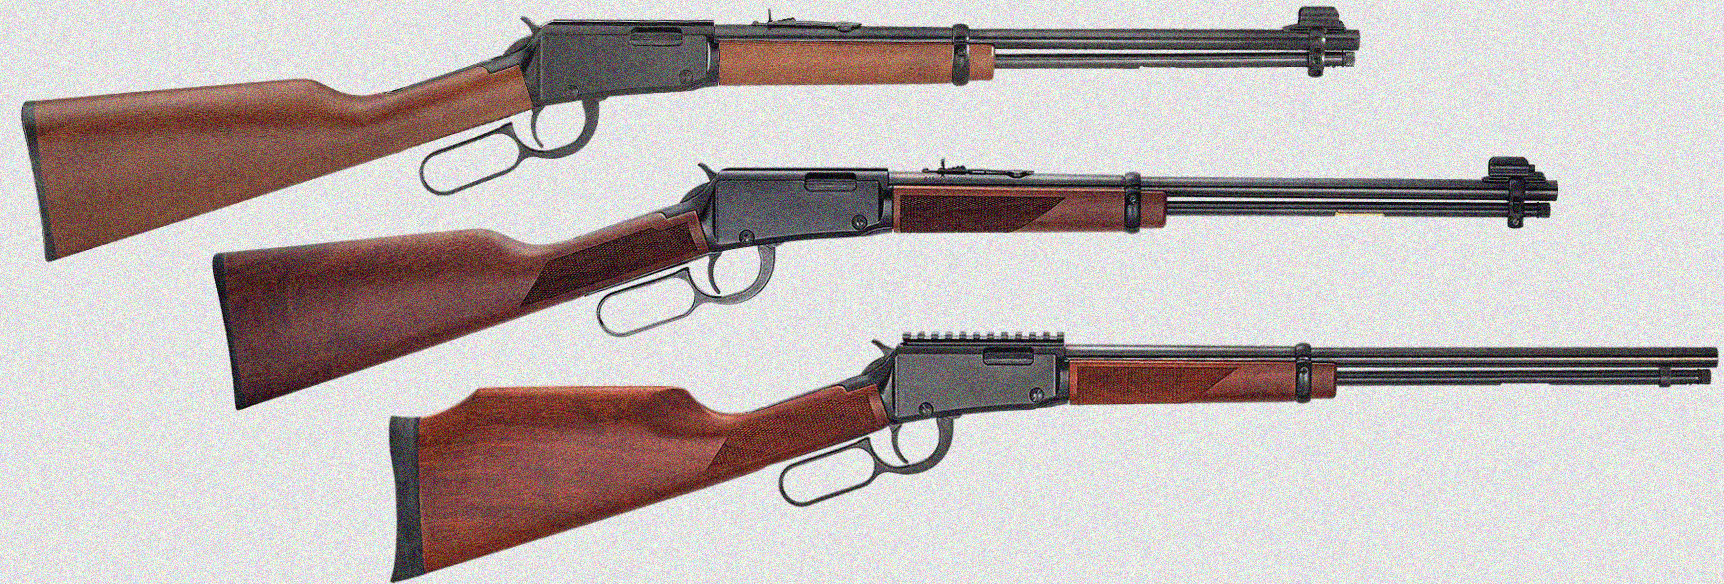 How to read henry rifle serial numbers?